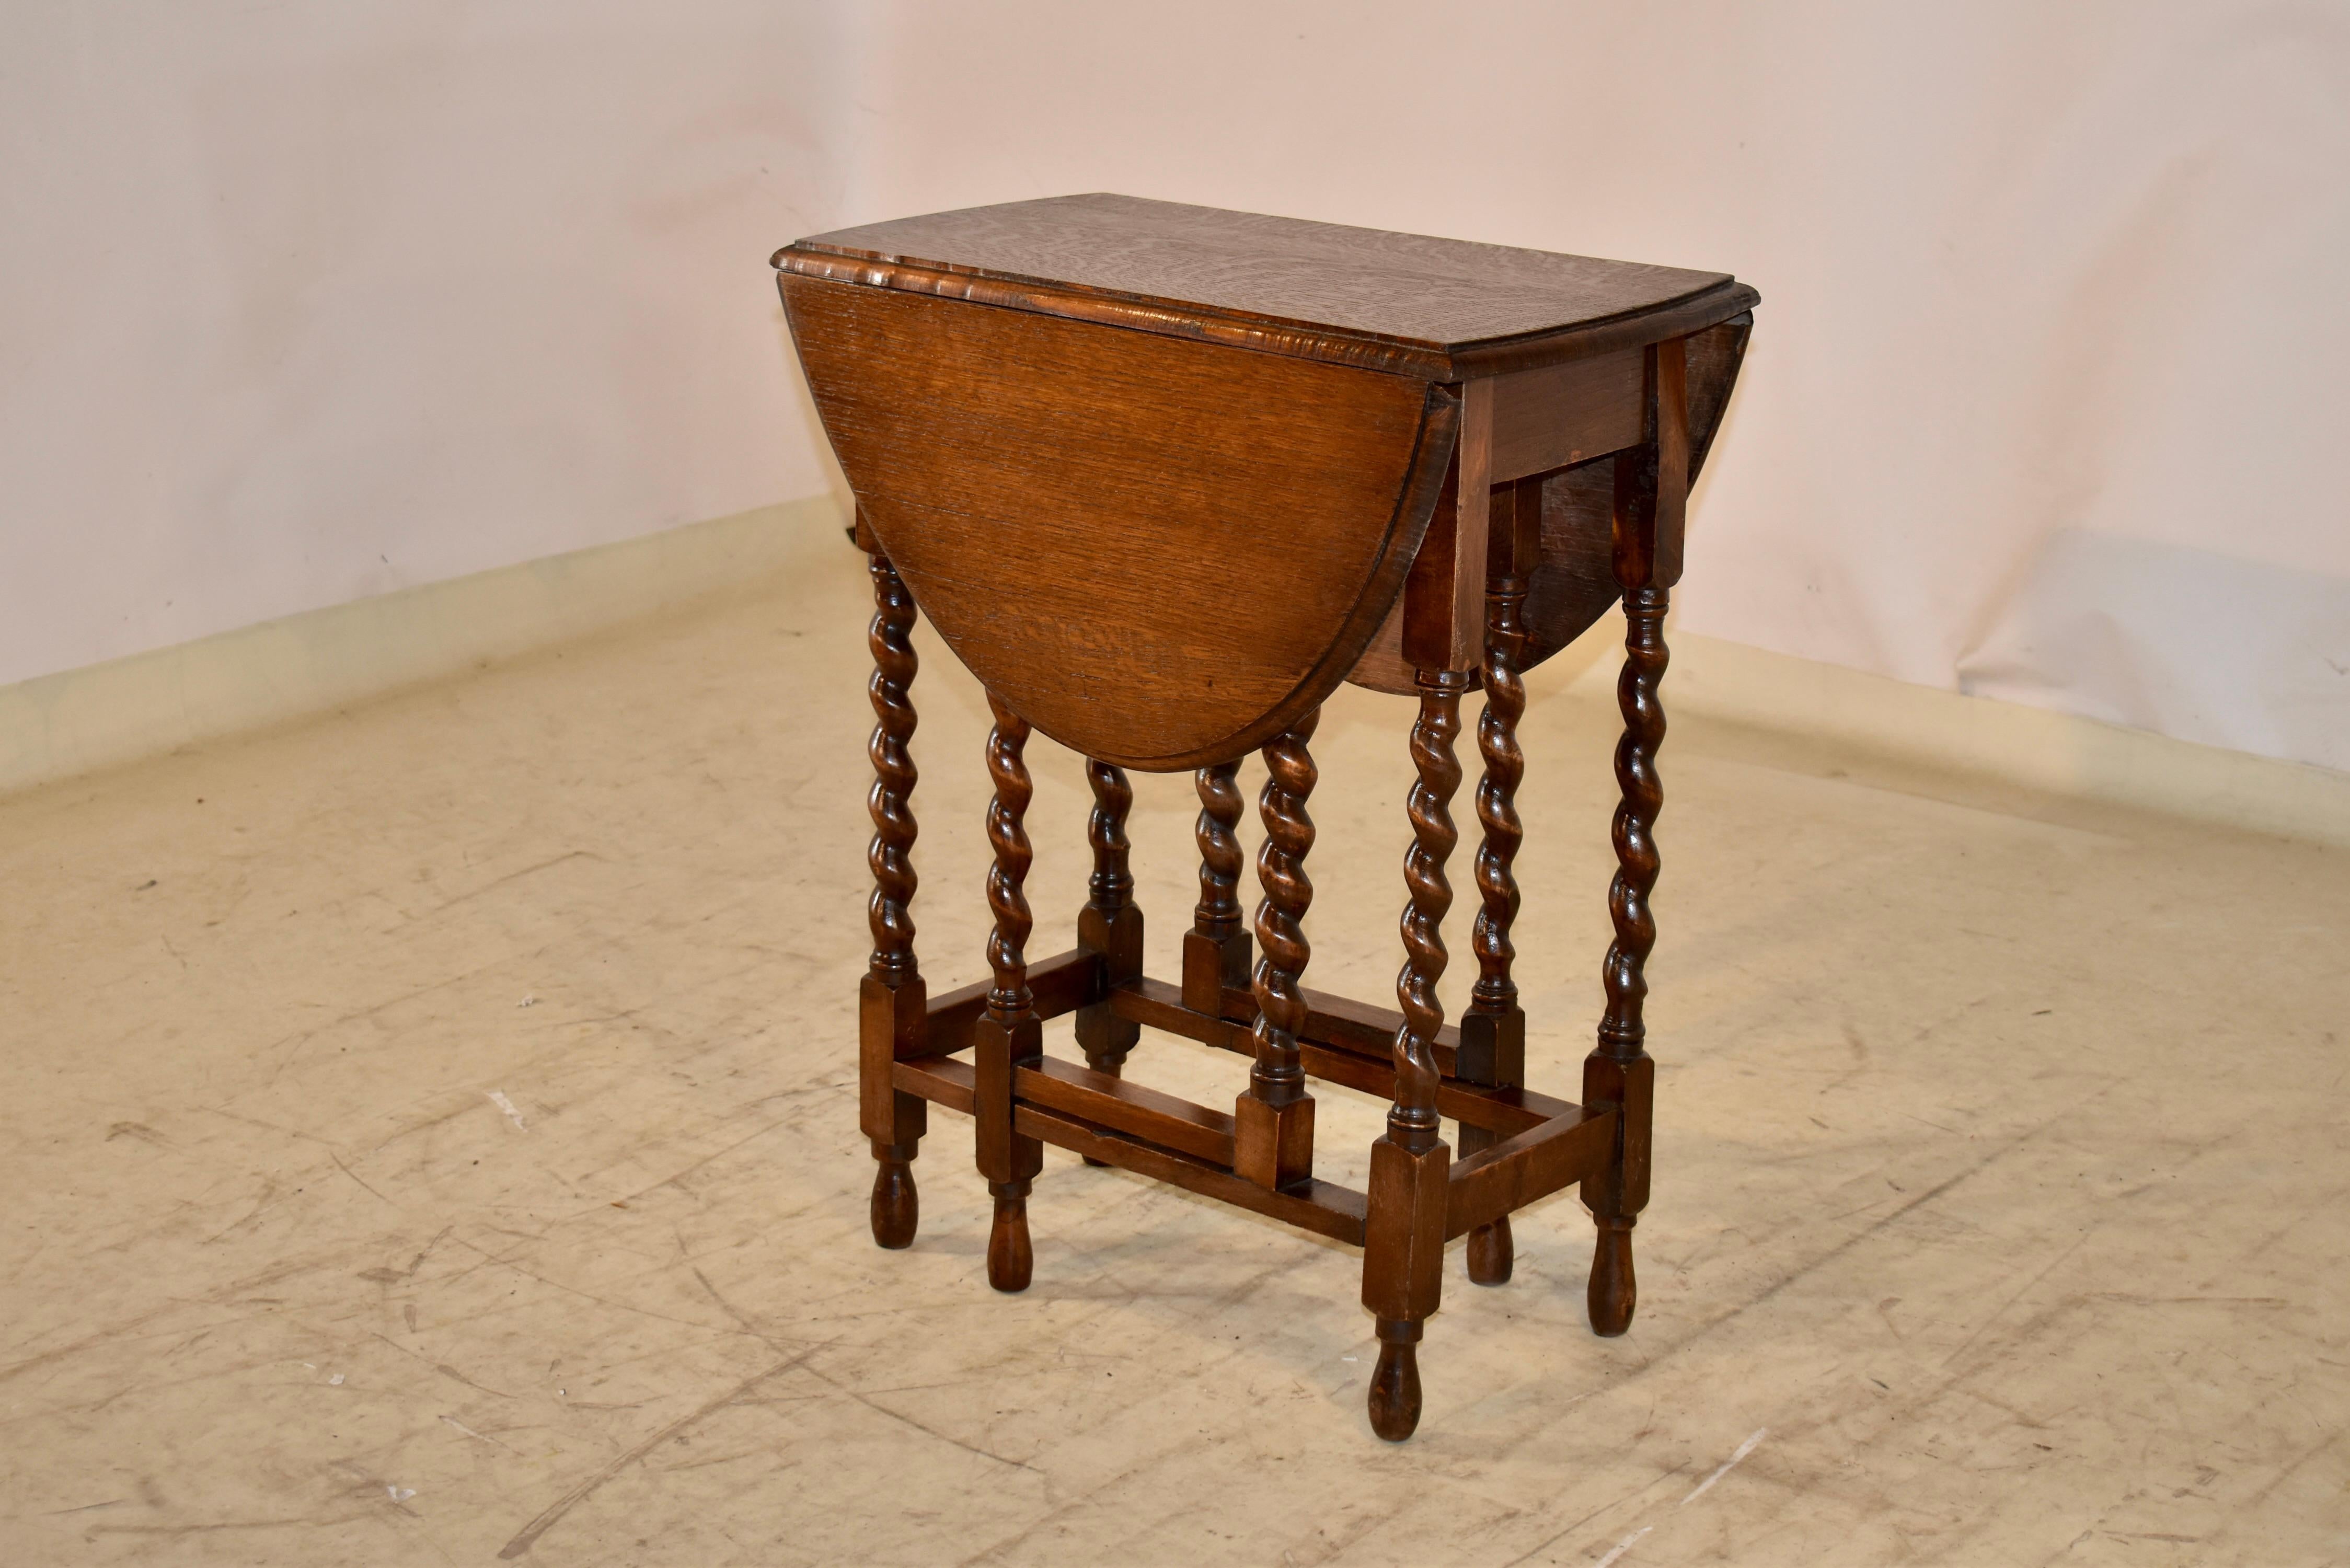 Edwardian English Gate Leg Table, Circa 1900 In Good Condition For Sale In High Point, NC